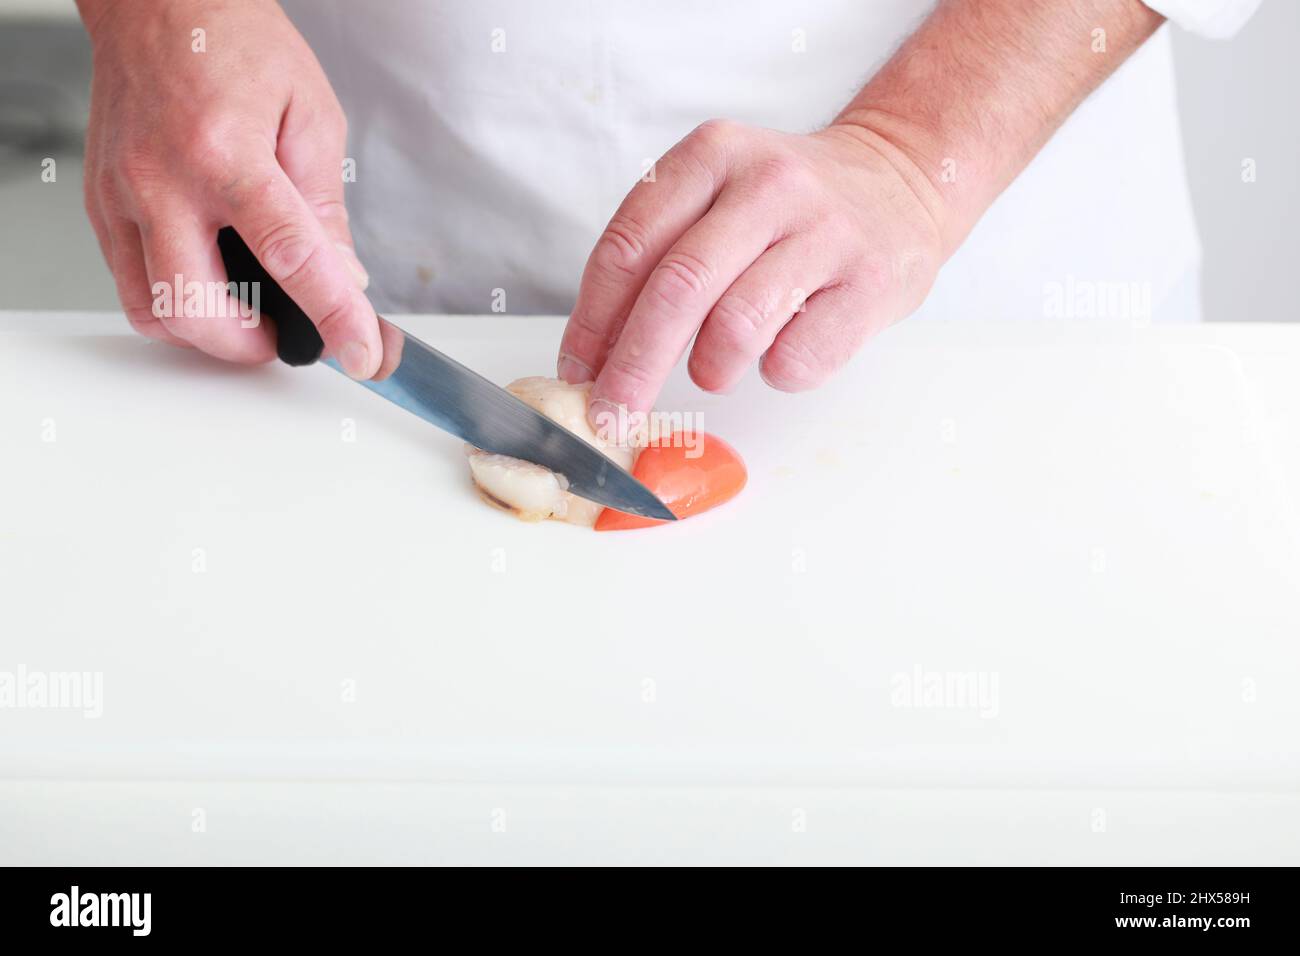 Preparing scallops, cutting away thick white piece of muscle on edge of scallop Stock Photo